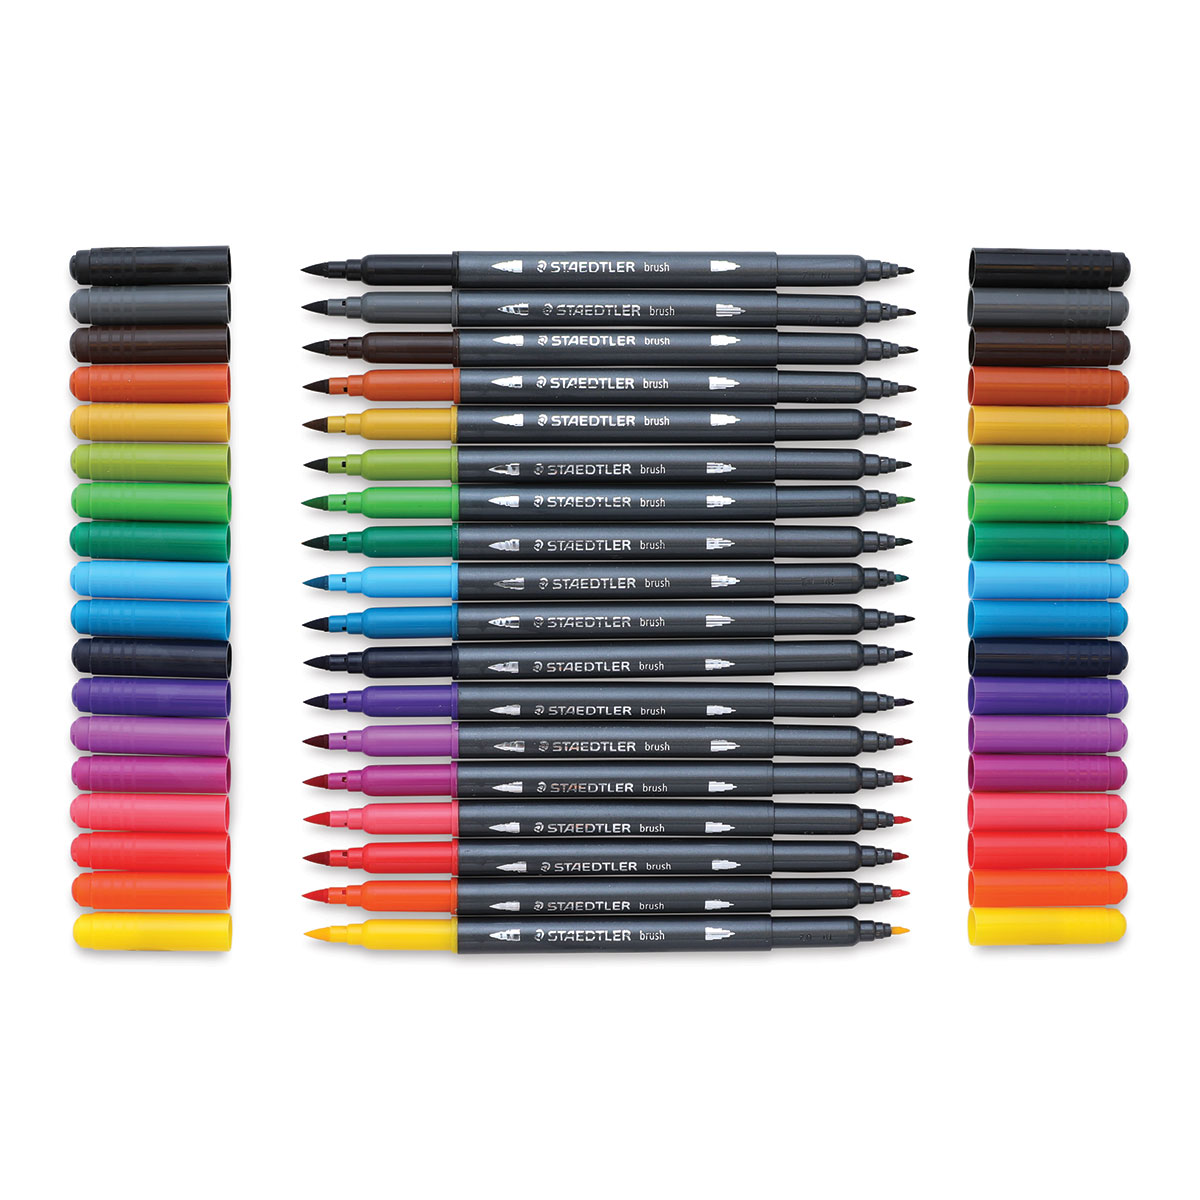 Water color pens stock image. Image of colorful, brush - 29332677